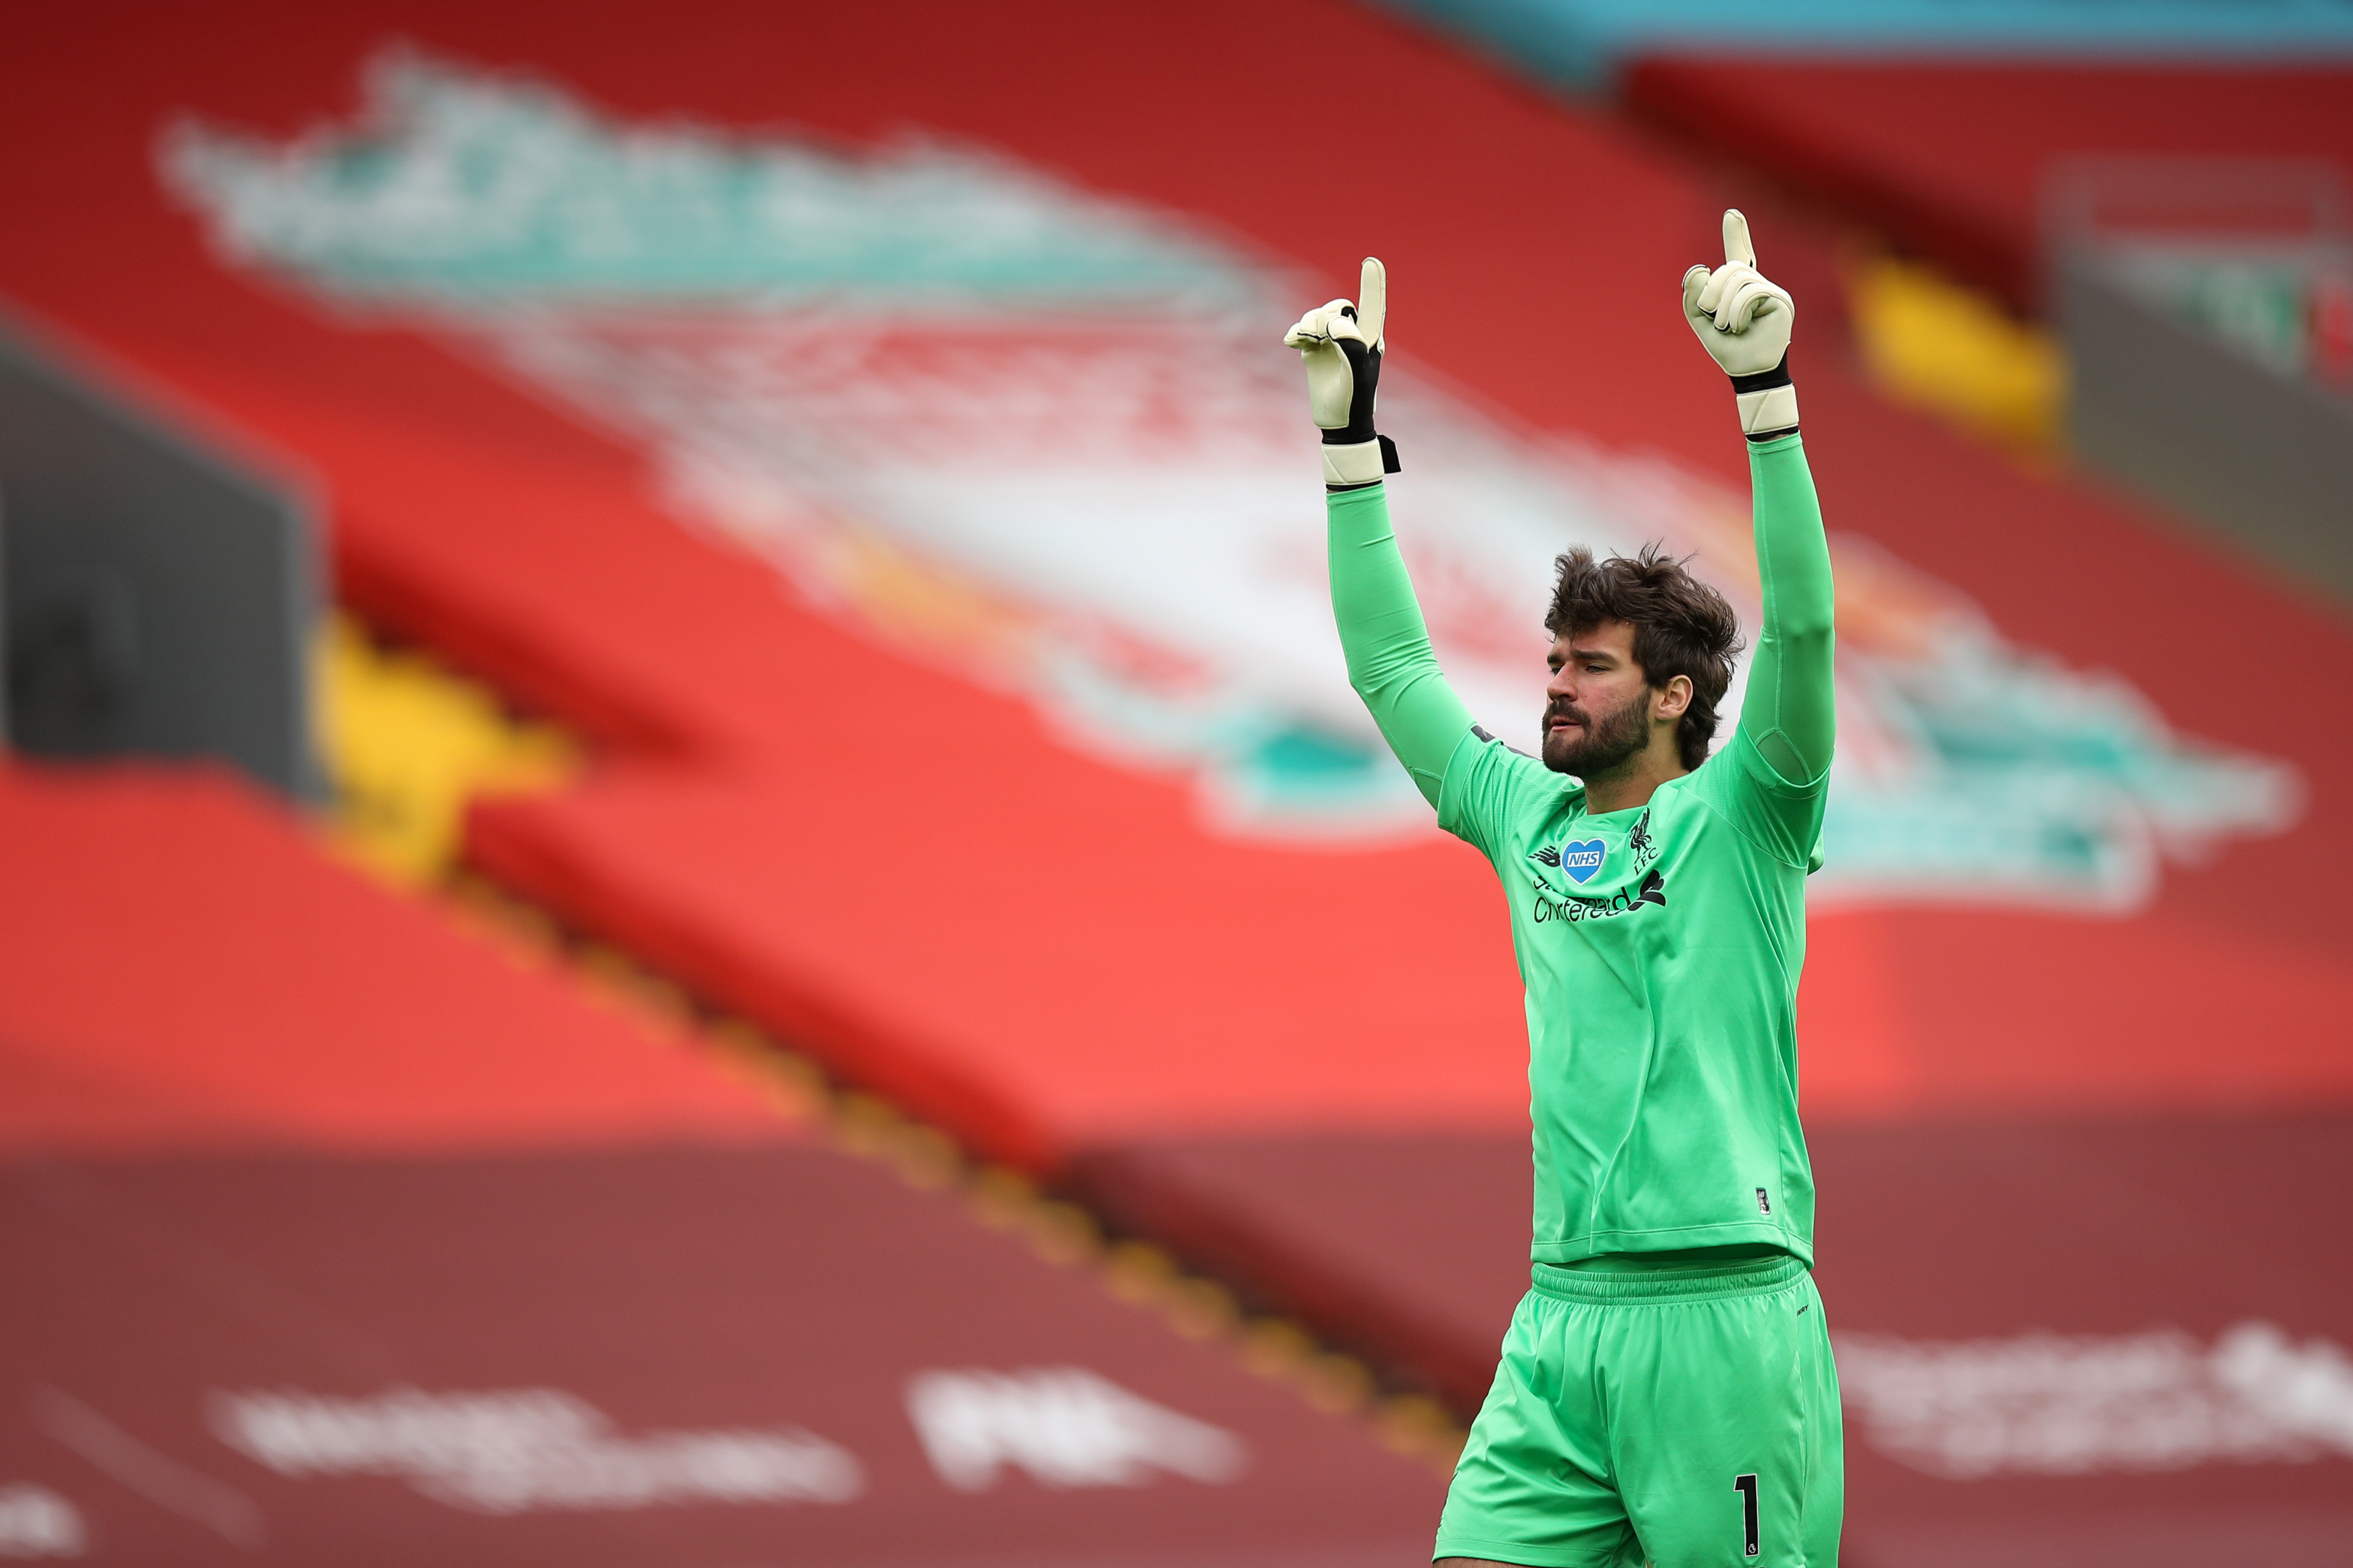 plan ornament Bryggeri Top 10 goalkeepers with most clean sheets in 2019/20 season